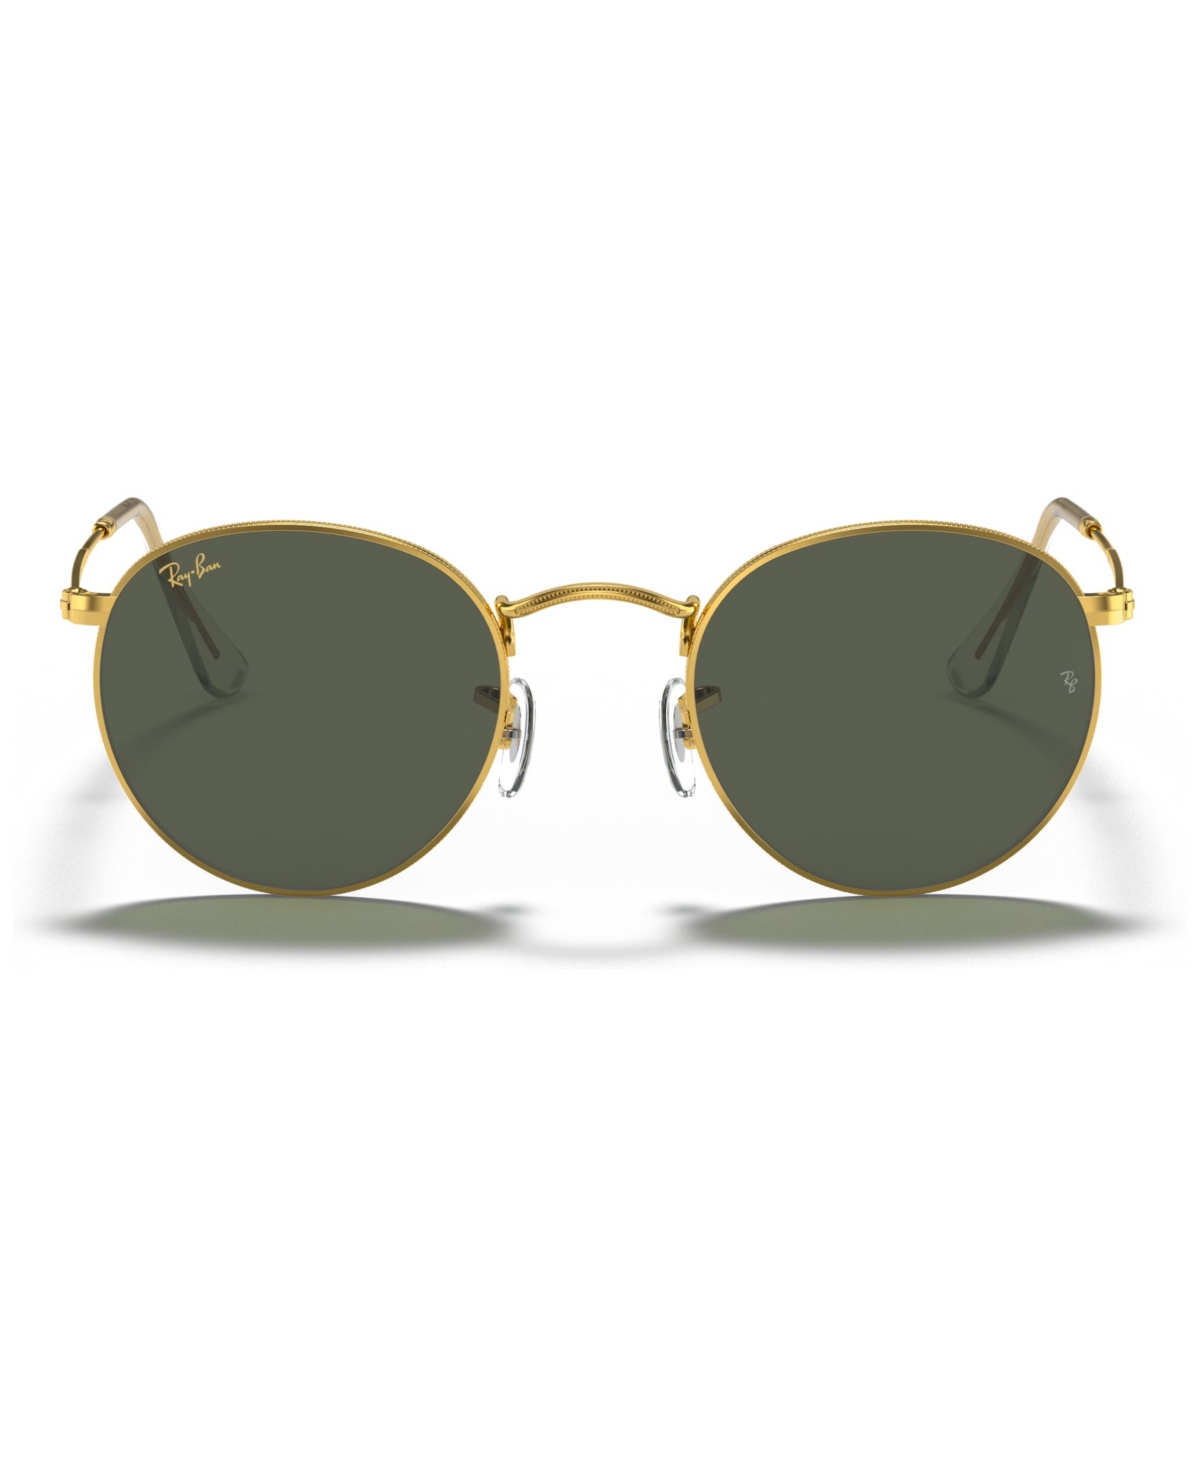 Ray Ban Round Metal Polarized Sunglasses, Rb3447 50 In Gold,polar Green